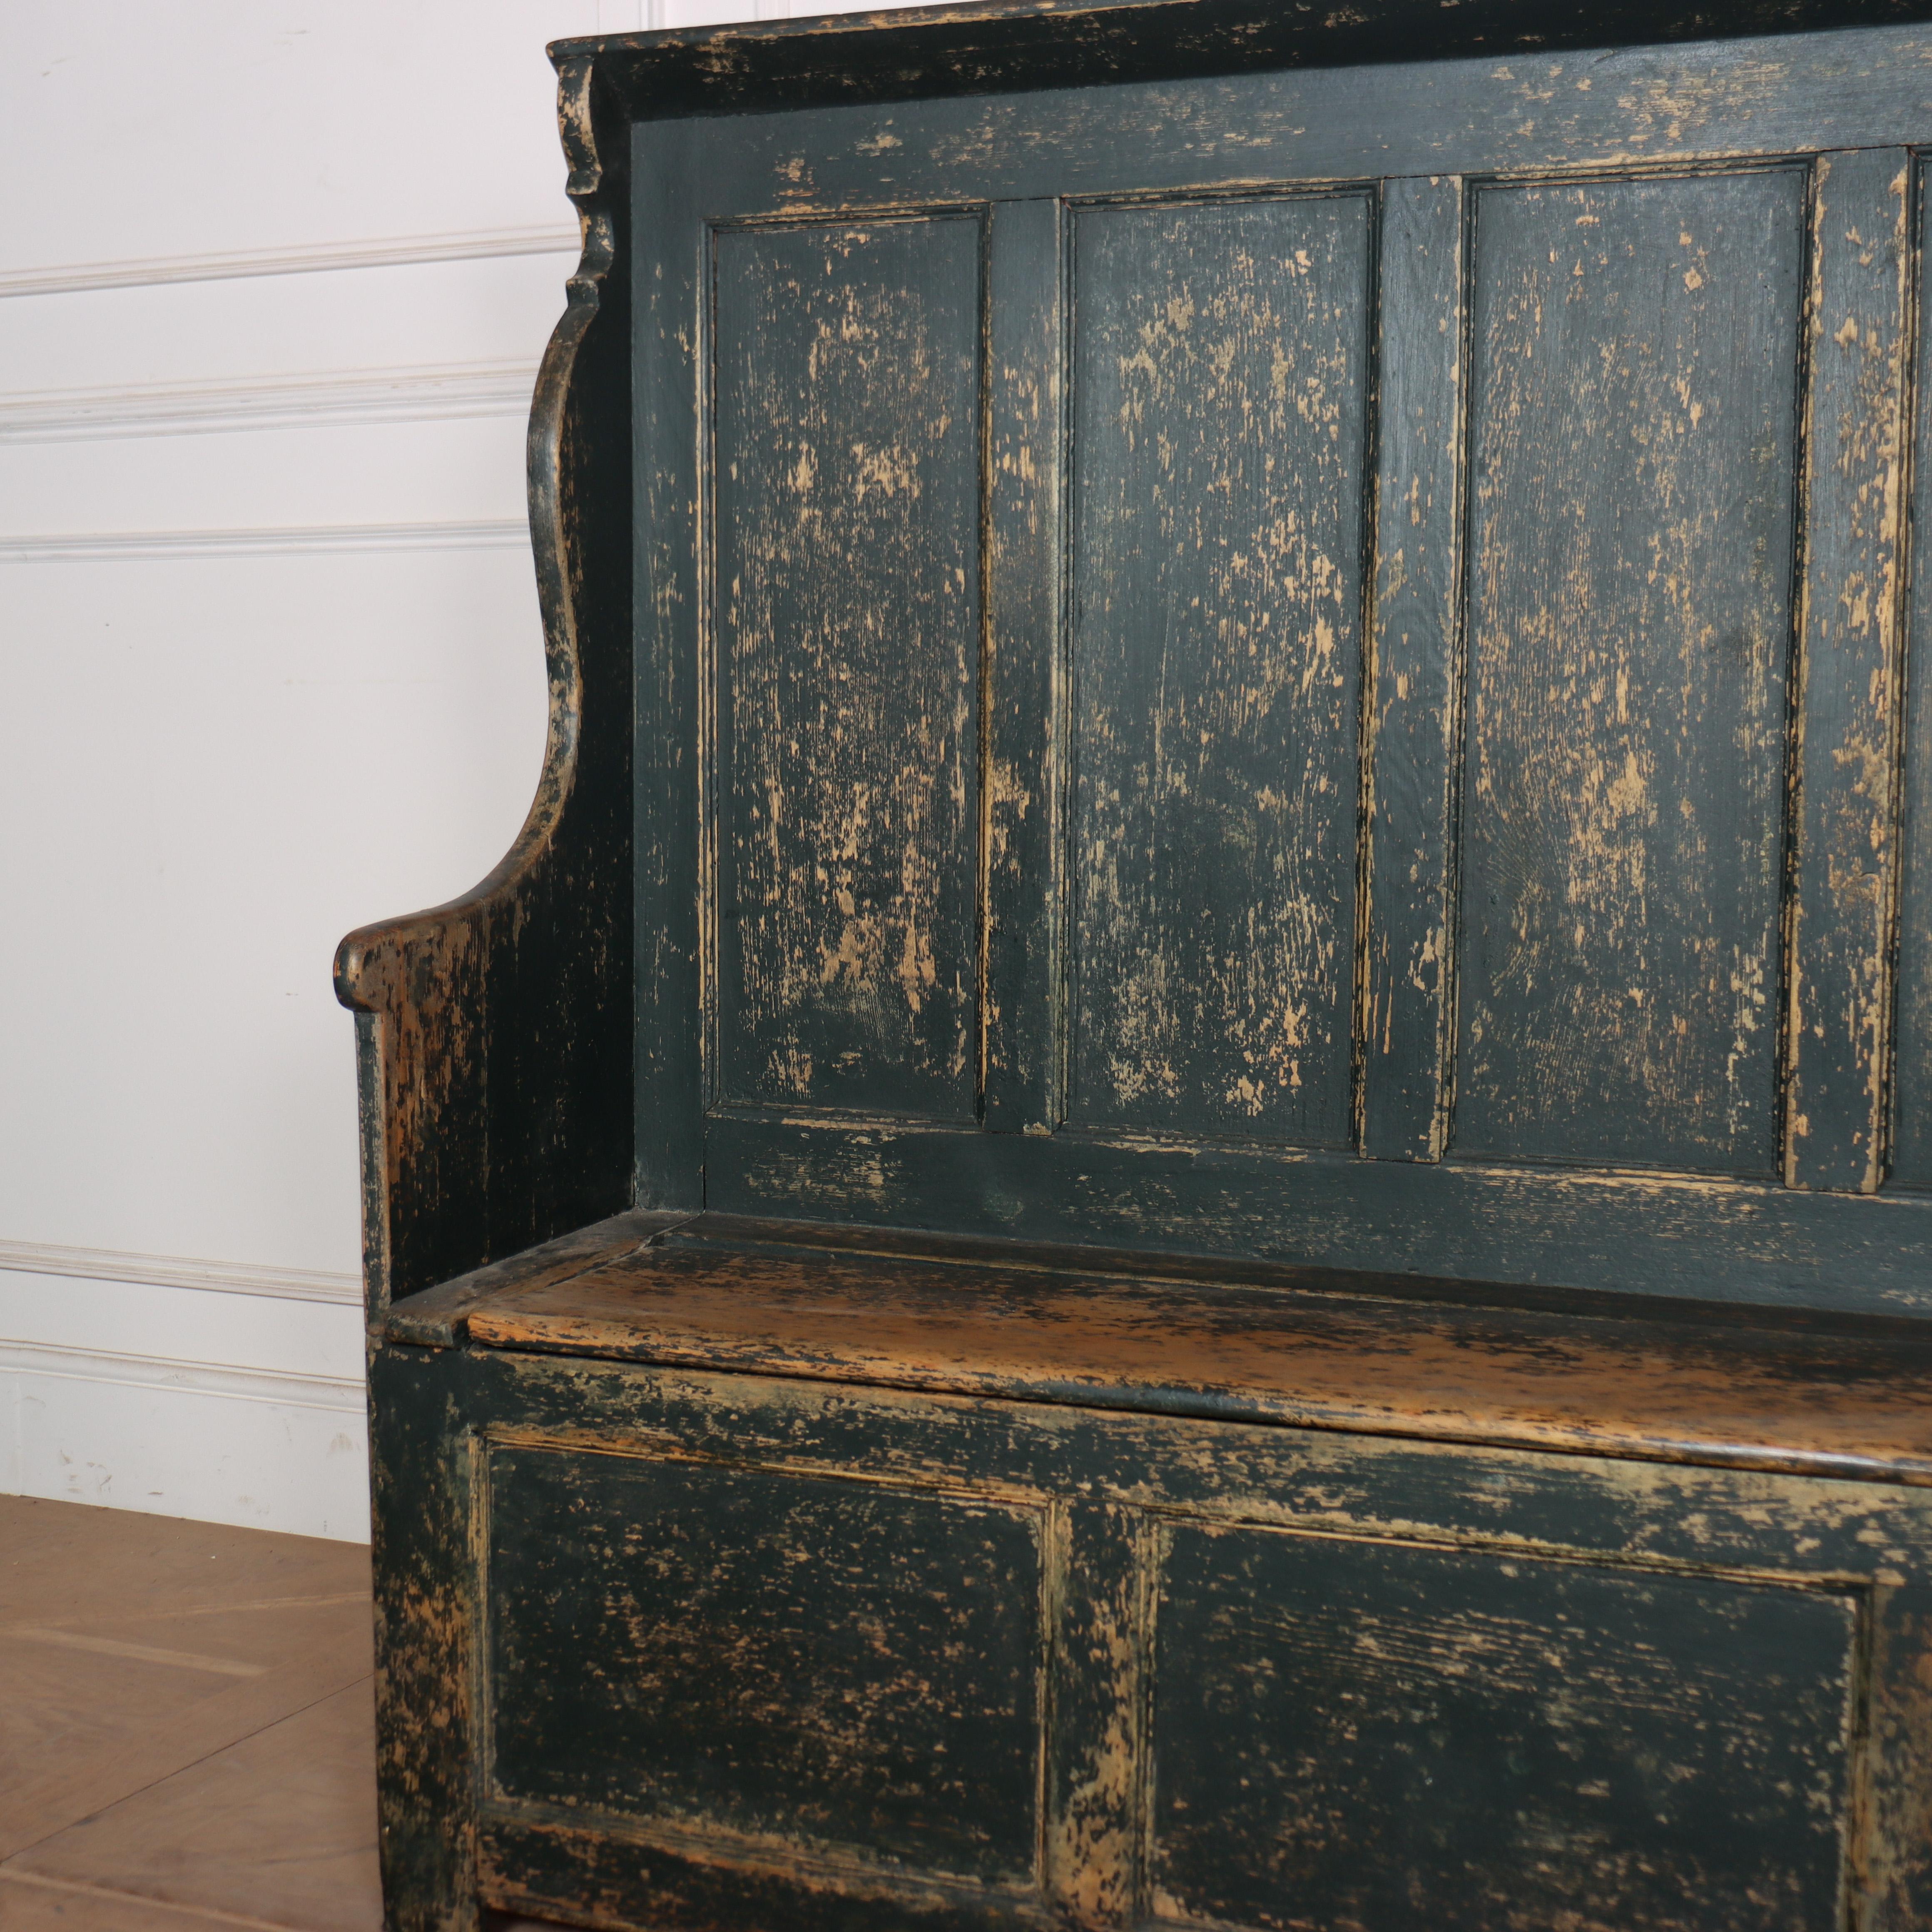 Early 19th C Welsh painted pine box settle. 1820.

Seat height is 18.5